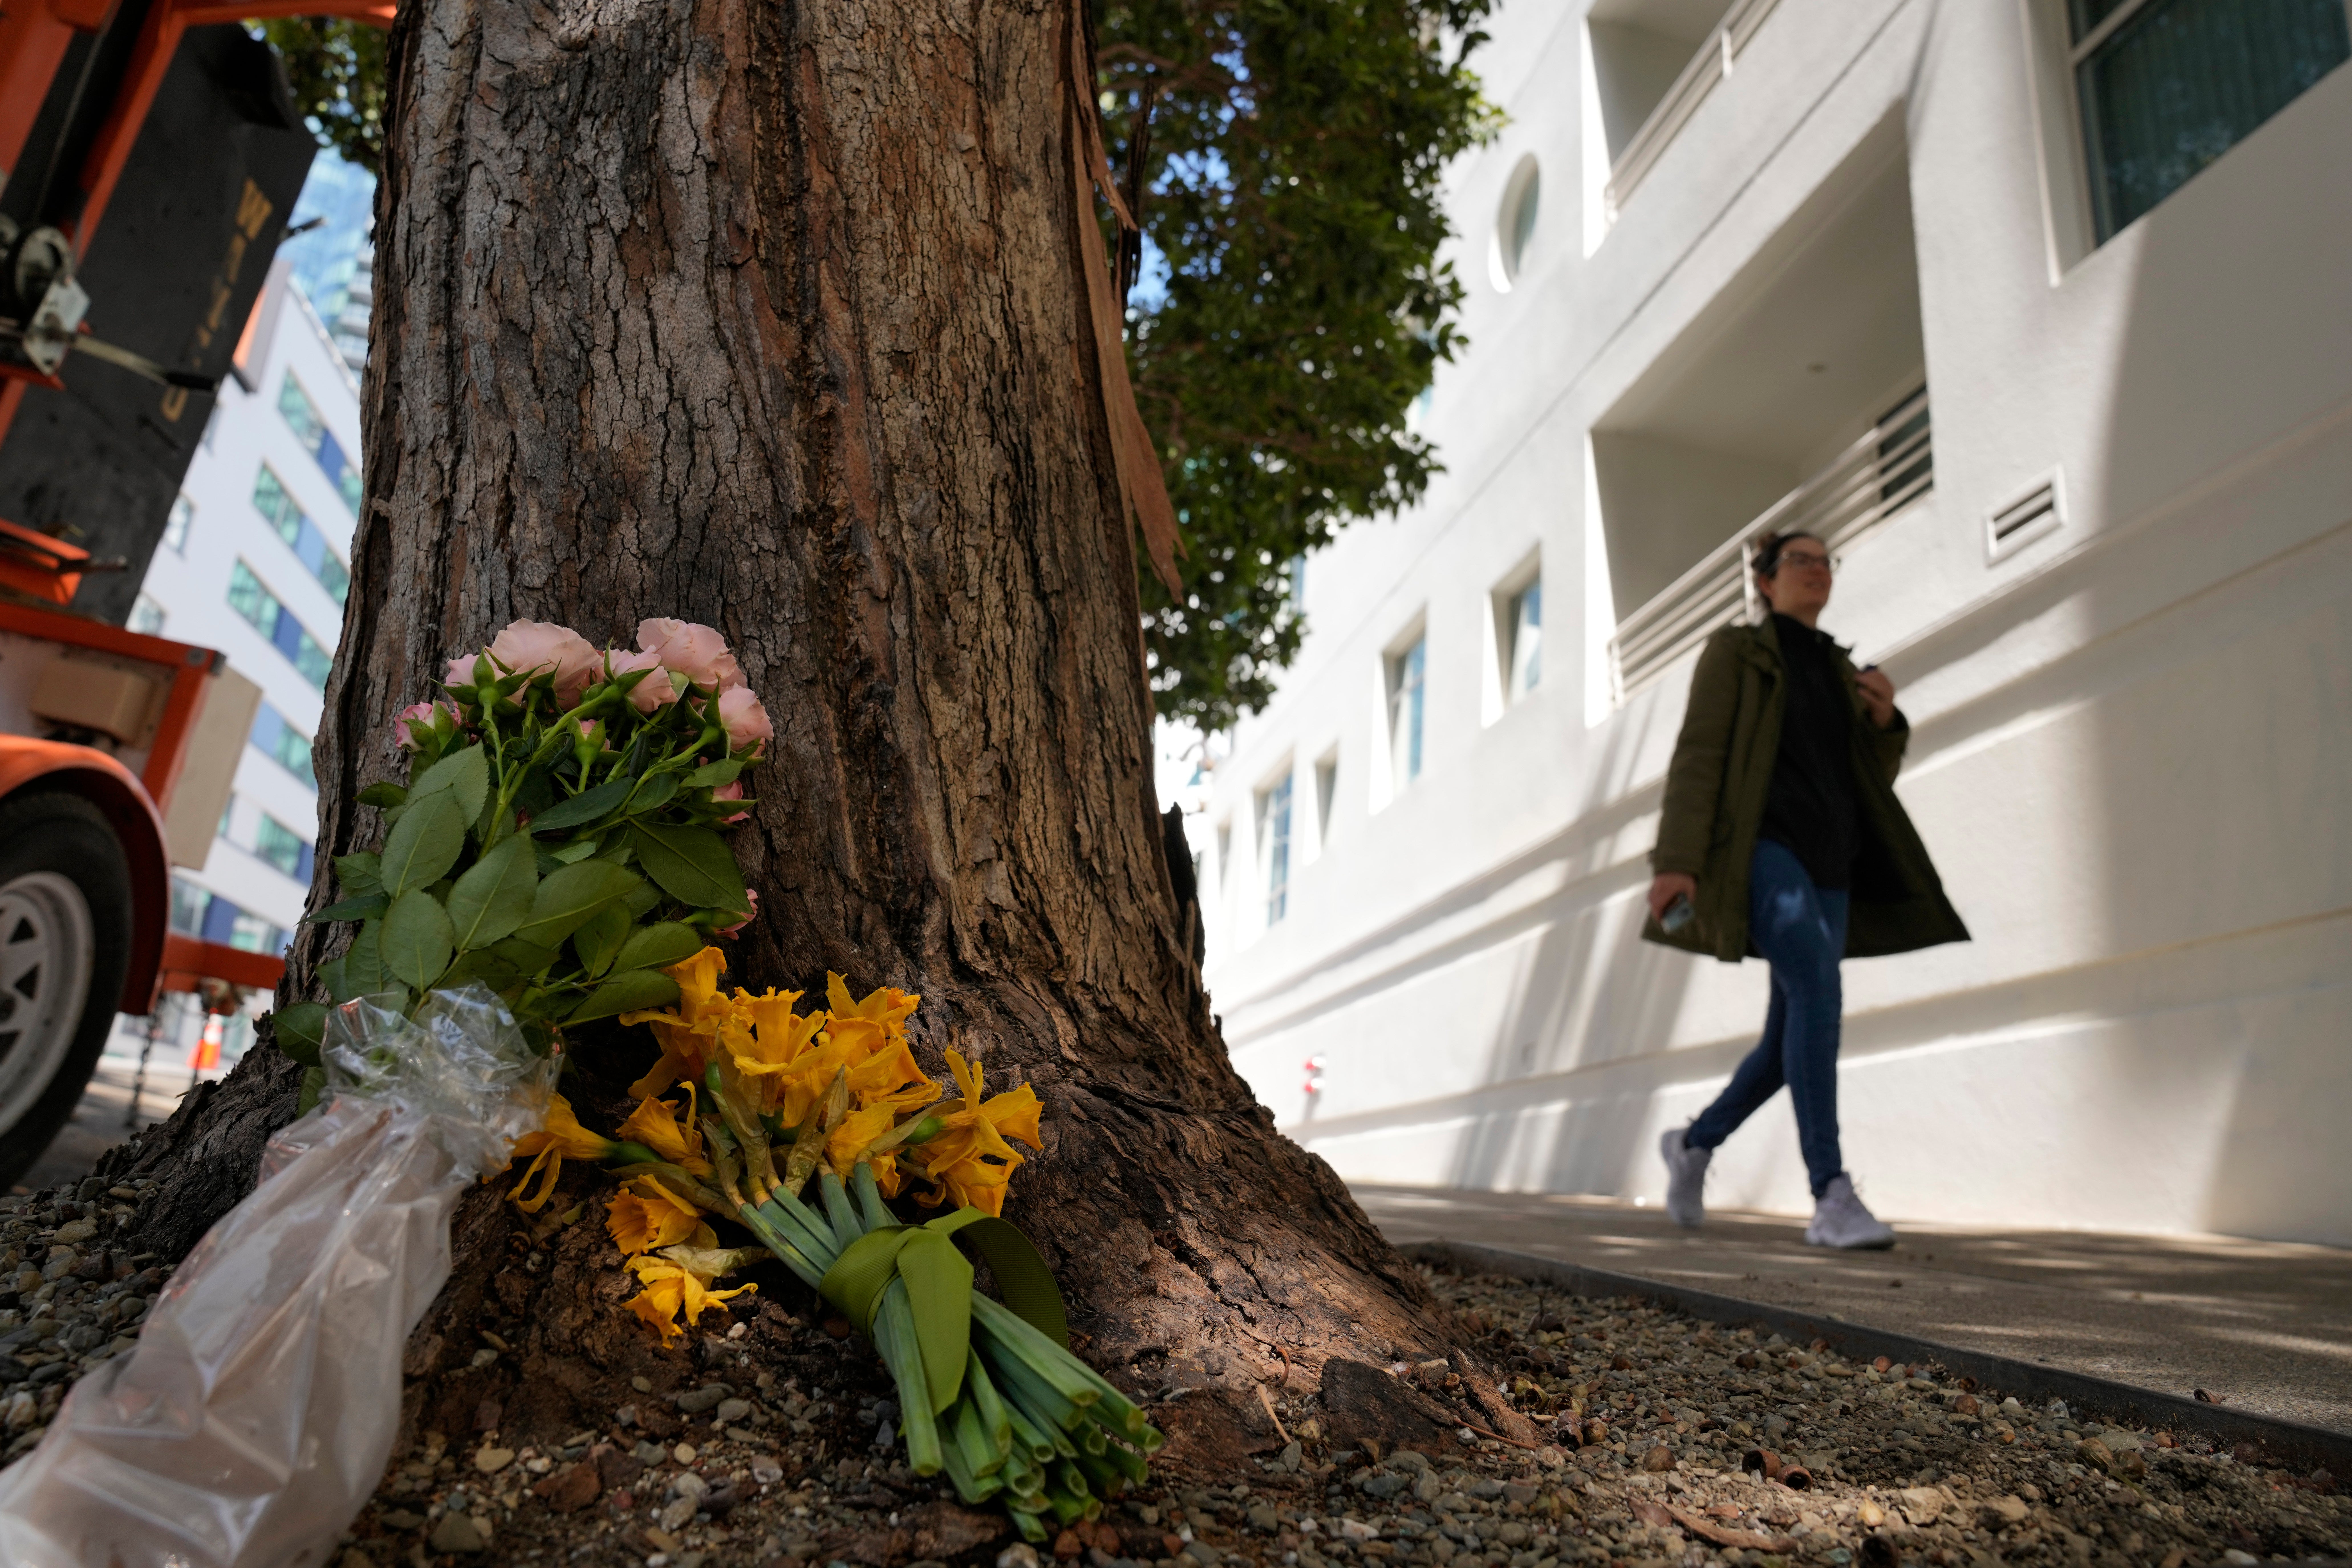 Flowers have been left outside an apartment building where Bob Lee was fatally stabbed in San Francisco